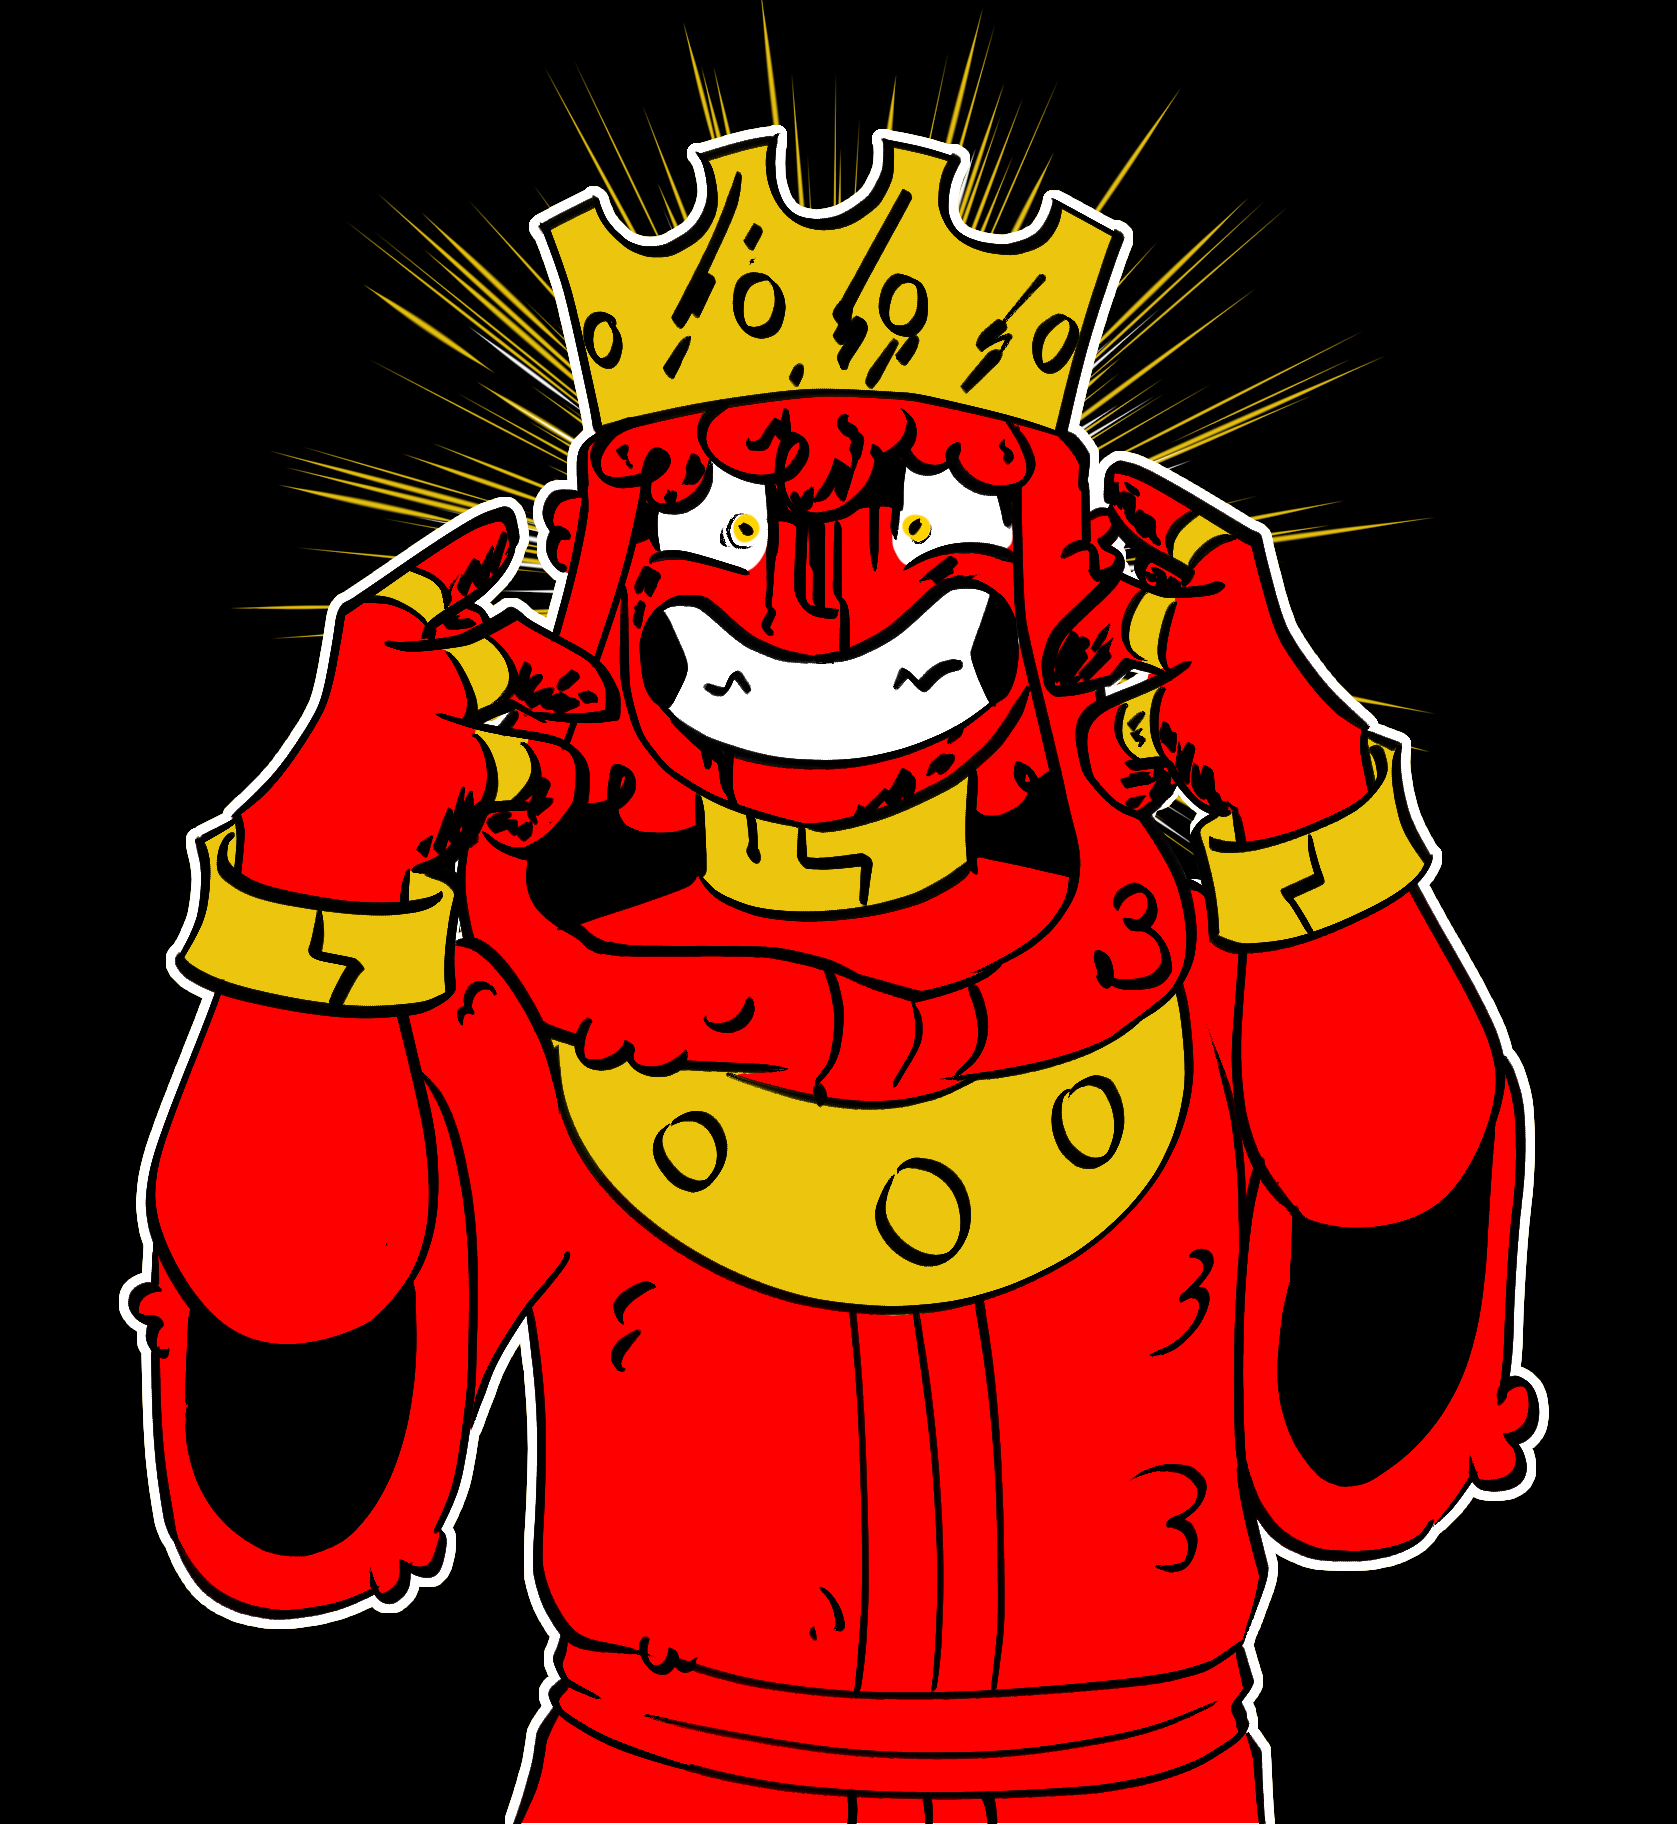 A drawing in red and gold of a person wearing a king's robe and crown, covered in tarnish marks around their face and hands. They are holding their heads to the sides of their head, pointing to the crown with a crazed expression. Sun rays surround their head like a halo.